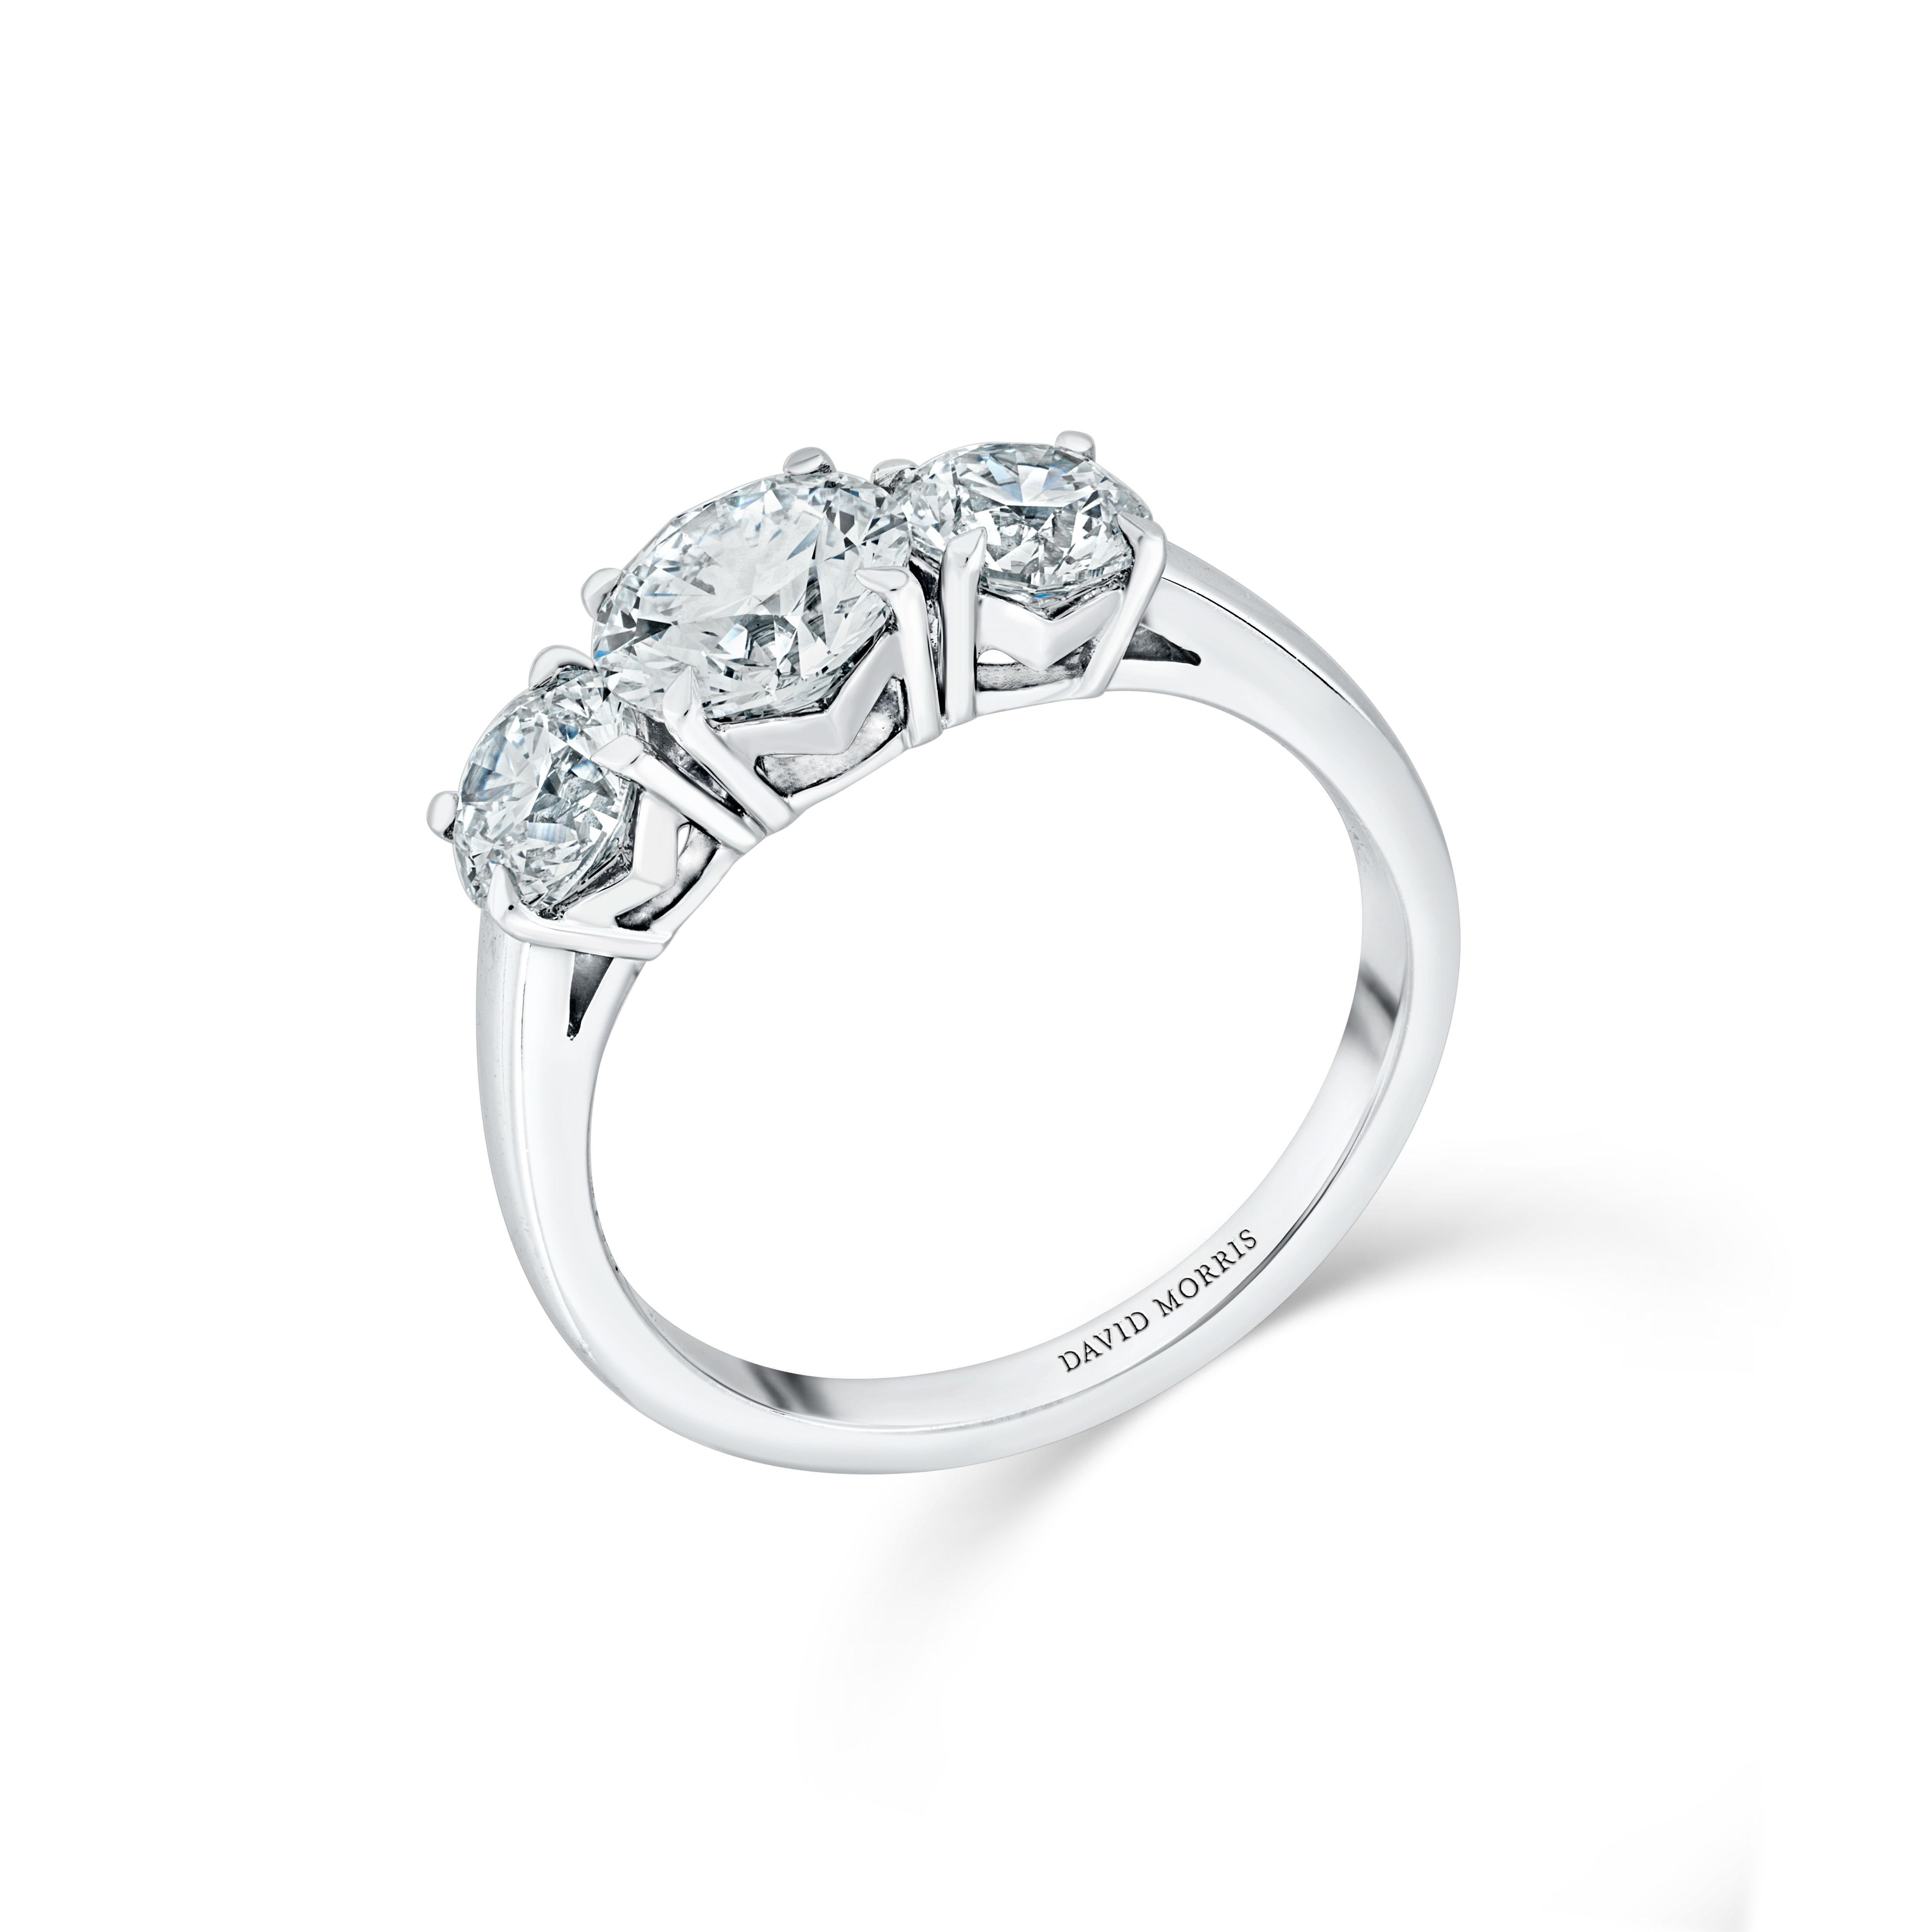 This ring is utterly stunning, at the heart of this enchanting creation, a mesmerizing 1.01 carat round brilliant-cut diamond flanked by two exquisite round brilliant-cut diamonds each weighing 0.50 carats. All three diamonds are graded colour F